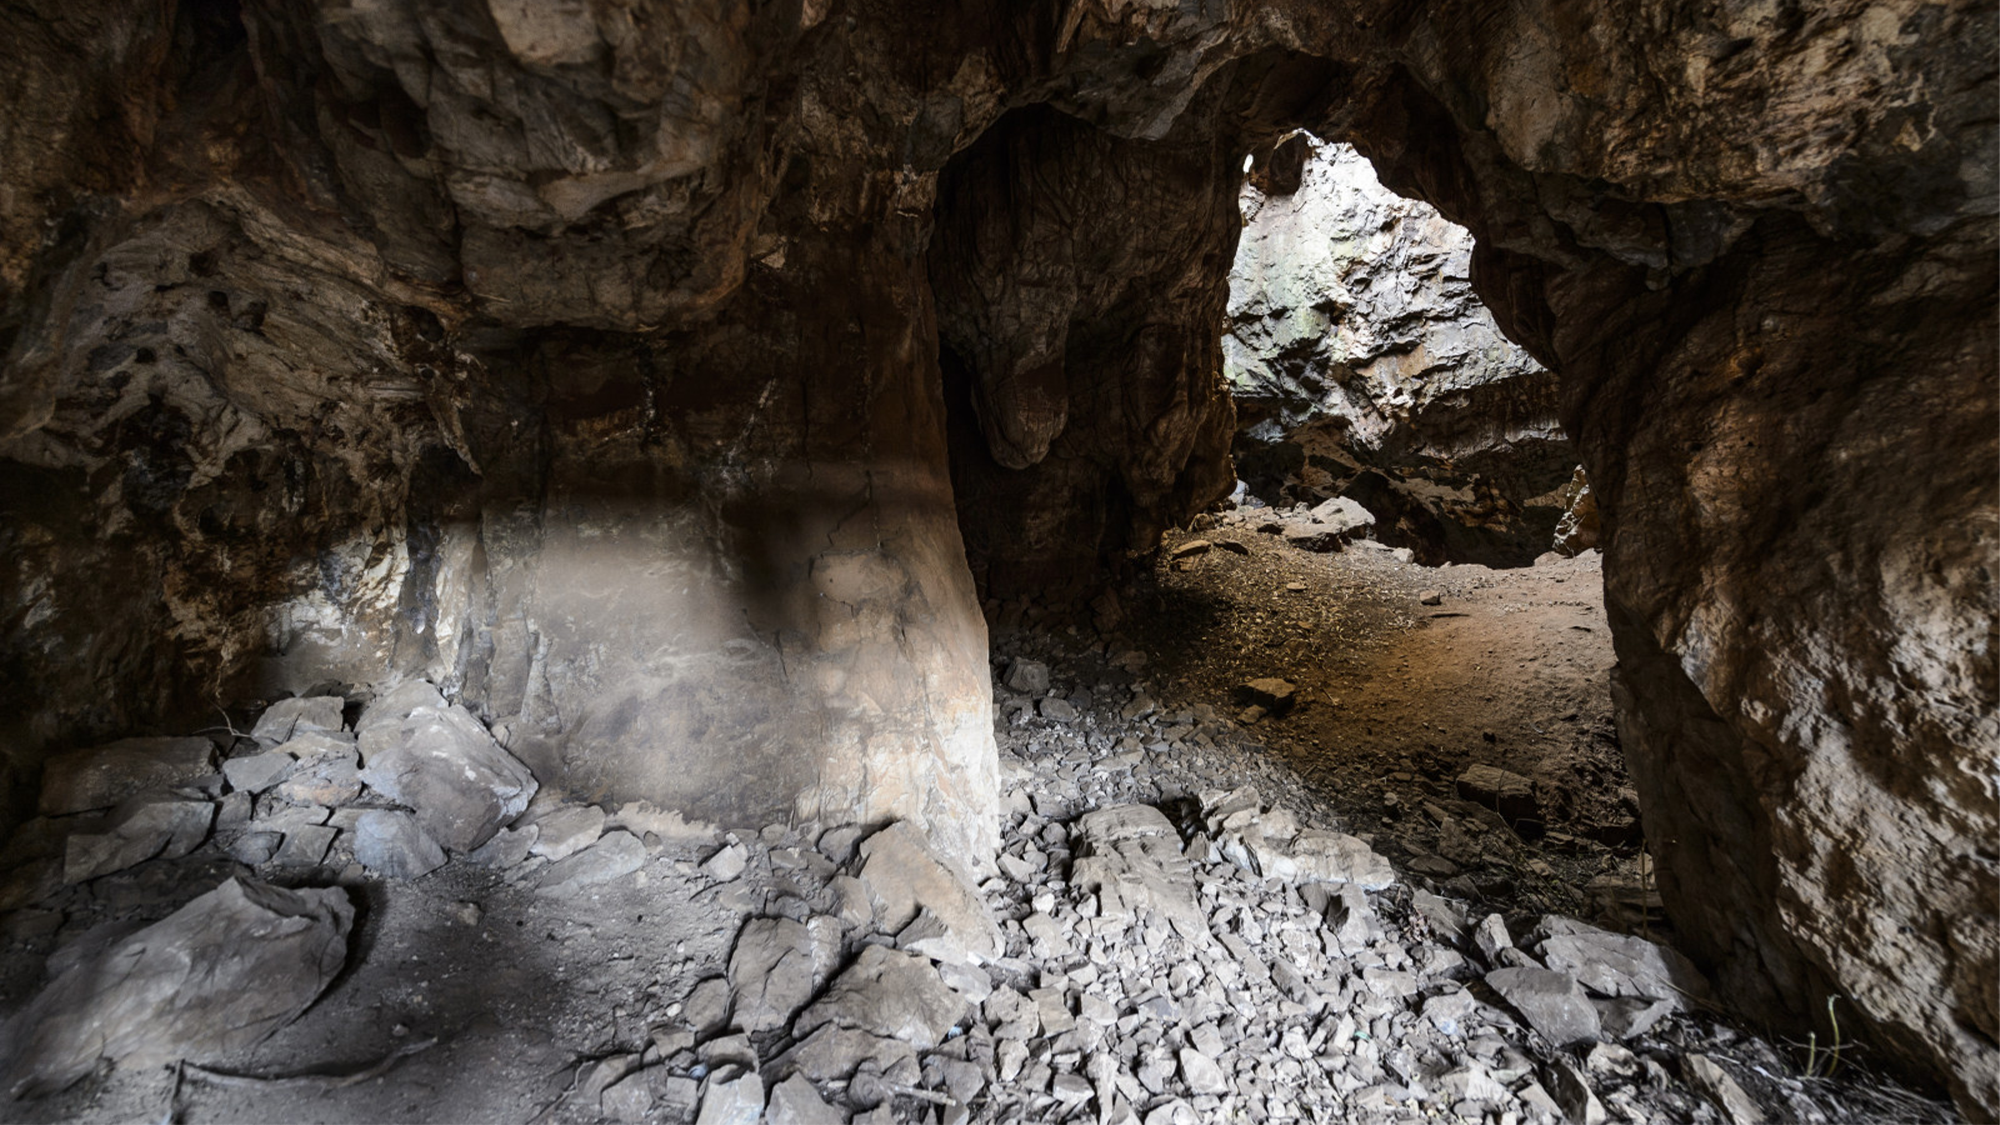 An entrance to the Dinaledi Chamber of the Rising Star Cave system, part of the Cradle of Humankind World Heritage Site near Johannesburg, South Africa. Newly found grave sites and wall engravings have led a team of archeologists to reevaluate the meaning-making capacity of an early human ancestor, Homo naledi.